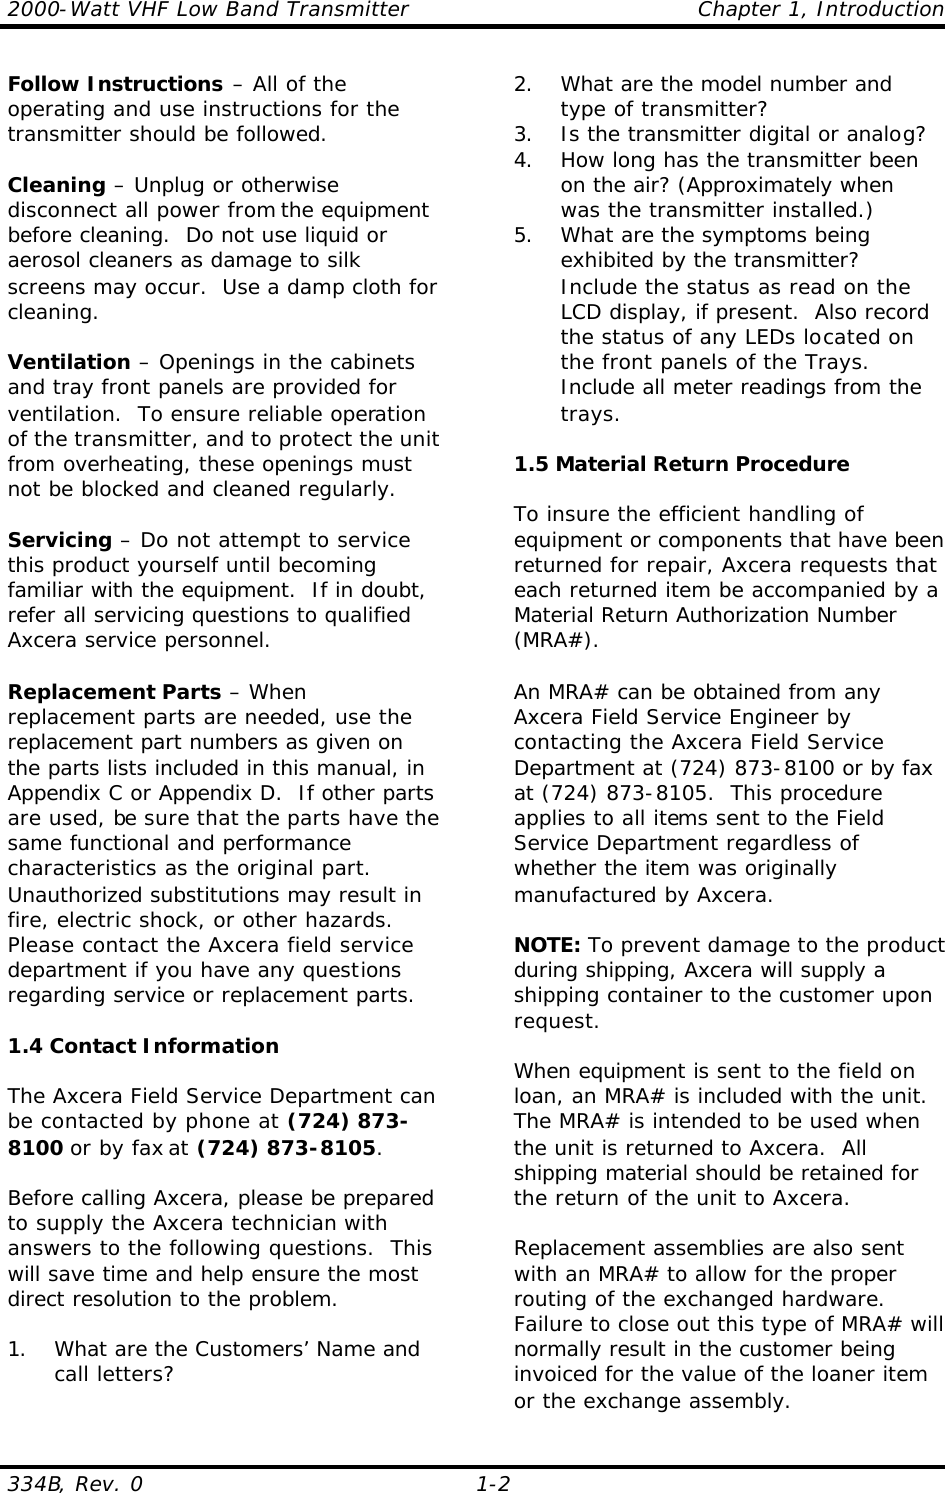 2000-Watt VHF Low Band Transmitter    Chapter 1, Introduction 334B, Rev. 0    1-2 Follow Instructions – All of the operating and use instructions for the transmitter should be followed.  Cleaning – Unplug or otherwise disconnect all power from the equipment before cleaning.  Do not use liquid or aerosol cleaners as damage to silk screens may occur.  Use a damp cloth for cleaning.  Ventilation – Openings in the cabinets and tray front panels are provided for ventilation.  To ensure reliable operation of the transmitter, and to protect the unit from overheating, these openings must not be blocked and cleaned regularly.  Servicing – Do not attempt to service this product yourself until becoming familiar with the equipment.  If in doubt, refer all servicing questions to qualified Axcera service personnel.  Replacement Parts – When replacement parts are needed, use the replacement part numbers as given on the parts lists included in this manual, in Appendix C or Appendix D.  If other parts are used, be sure that the parts have the same functional and performance characteristics as the original part.  Unauthorized substitutions may result in fire, electric shock, or other hazards.  Please contact the Axcera field service department if you have any questions regarding service or replacement parts.  1.4 Contact Information  The Axcera Field Service Department can be contacted by phone at (724) 873-8100 or by fax at (724) 873-8105.    Before calling Axcera, please be prepared to supply the Axcera technician with answers to the following questions.  This will save time and help ensure the most direct resolution to the problem.  1. What are the Customers’ Name and call letters? 2. What are the model number and type of transmitter? 3. Is the transmitter digital or analog? 4. How long has the transmitter been on the air? (Approximately when was the transmitter installed.) 5. What are the symptoms being exhibited by the transmitter? Include the status as read on the LCD display, if present.  Also record the status of any LEDs located on the front panels of the Trays.  Include all meter readings from the trays.  1.5 Material Return Procedure  To insure the efficient handling of equipment or components that have been returned for repair, Axcera requests that each returned item be accompanied by a Material Return Authorization Number (MRA#).  An MRA# can be obtained from any Axcera Field Service Engineer by contacting the Axcera Field Service Department at (724) 873-8100 or by fax at (724) 873-8105.  This procedure applies to all items sent to the Field Service Department regardless of whether the item was originally manufactured by Axcera.  NOTE: To prevent damage to the product during shipping, Axcera will supply a shipping container to the customer upon request.  When equipment is sent to the field on loan, an MRA# is included with the unit. The MRA# is intended to be used when the unit is returned to Axcera.  All shipping material should be retained for the return of the unit to Axcera.   Replacement assemblies are also sent with an MRA# to allow for the proper routing of the exchanged hardware. Failure to close out this type of MRA# will normally result in the customer being invoiced for the value of the loaner item or the exchange assembly. 